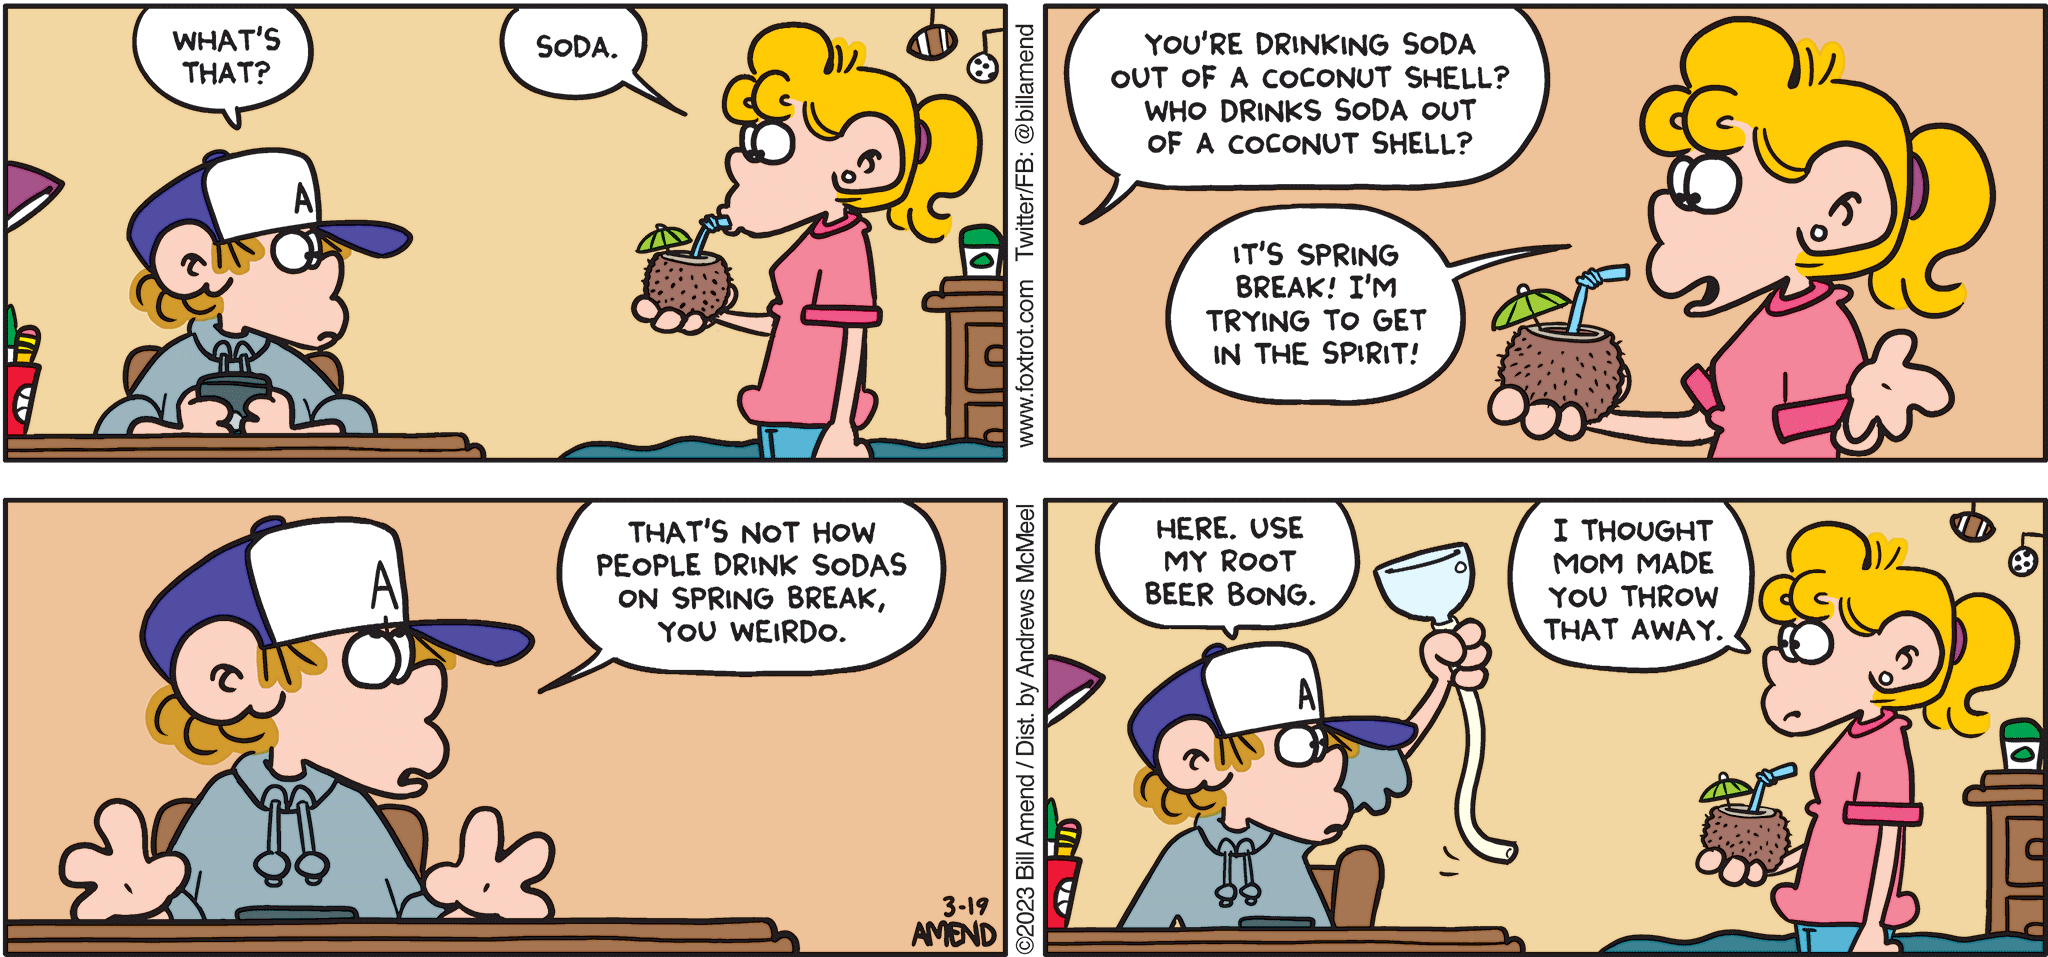 FoxTrot comic strip by Bill Amend - "Soda Springs" published March 19, 2023 - Transcript: Peter Fox: What's that? Paige Fox: Soda. Peter Fox: You're drinking soda out of a coconut shell? Who drinks soda out of a coconut shell? Paige Fox: It's spring break! I'm trying to get in the spirit! Peter Fox: That's not how people drink sodas on spring break, you weirdo. Here. Use my root beer bong. Paige Fox: I thought mom made you throw that away.